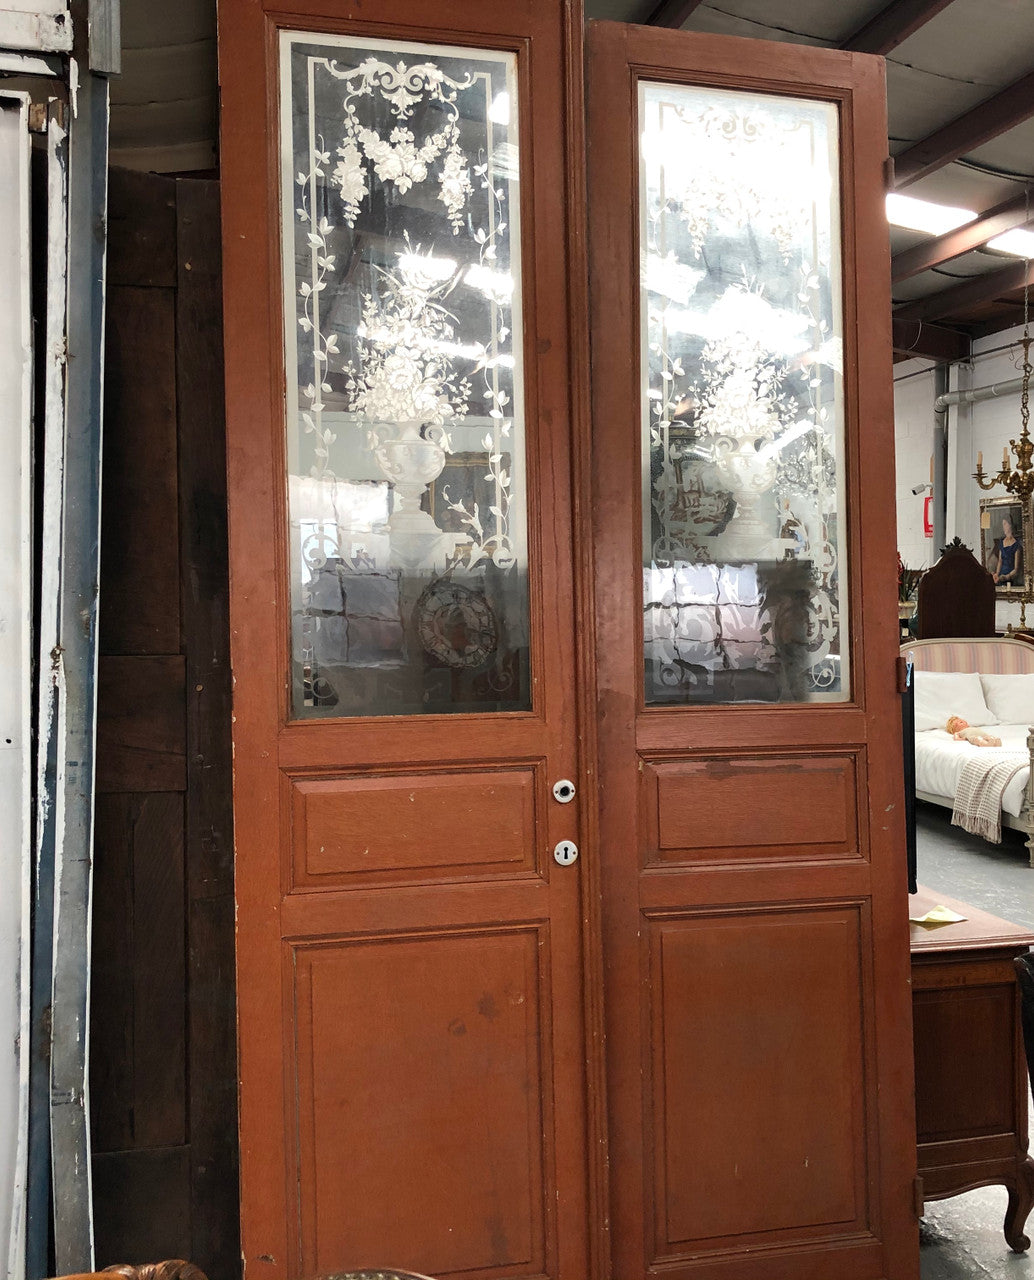 Pair of French Antique 19th century doors. They have beautiful acid etched panels and are in good original condition.